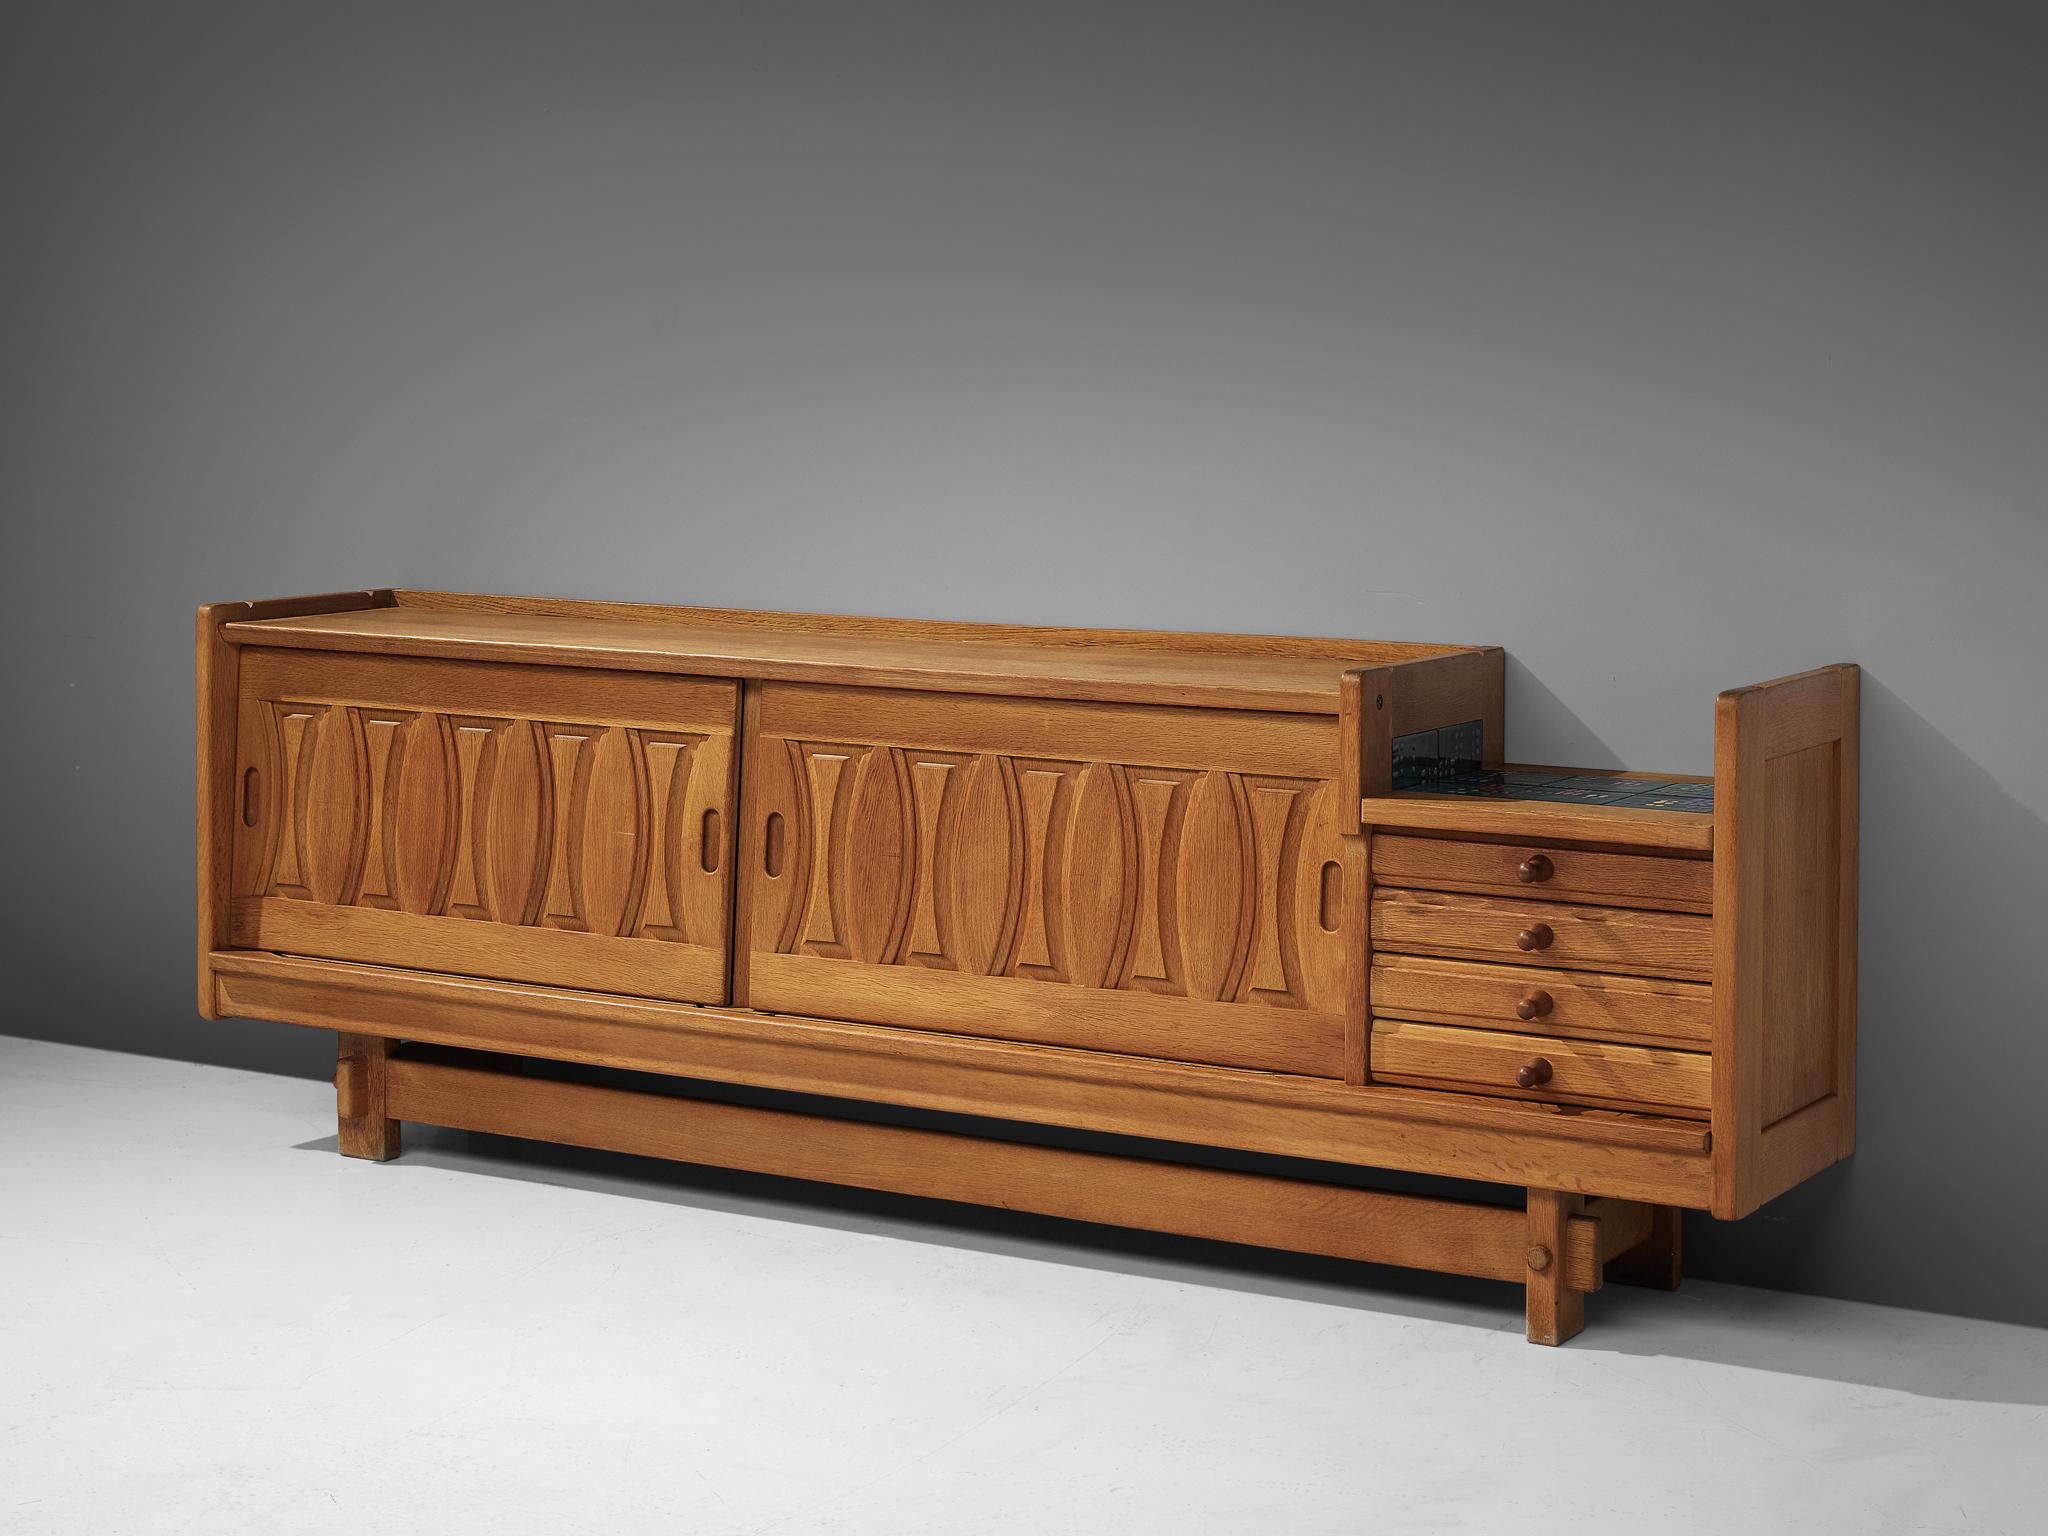 Guillerme et Chambron for Votre Maison, sideboard, oak, ceramics, France, 1960s

Credenza in oak by French designers Guillerme & Chambron. This sideboard is equipped with two sliding doors and a set of drawers. The front of the sideboard is